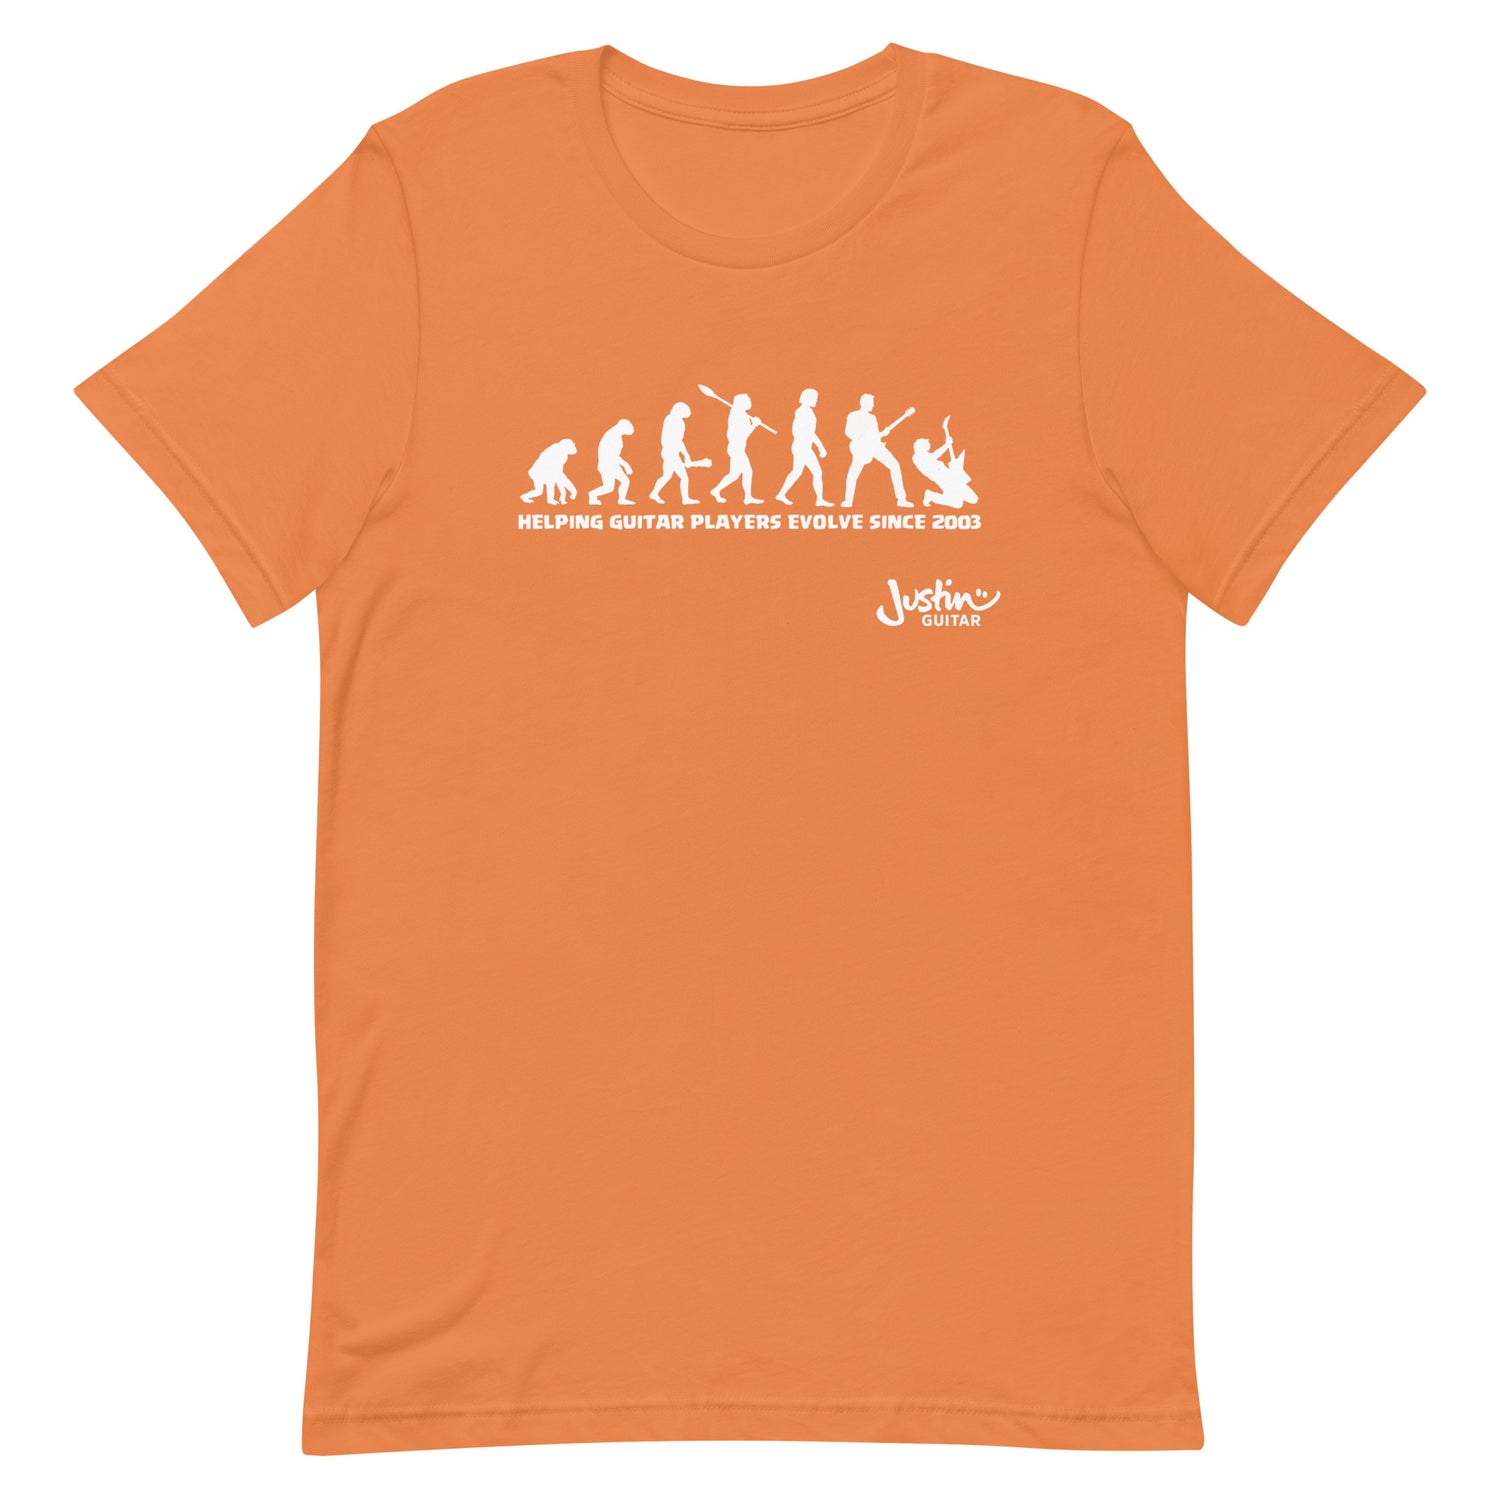 Orange Tshirt with funny design of evolving guitar players through time. 